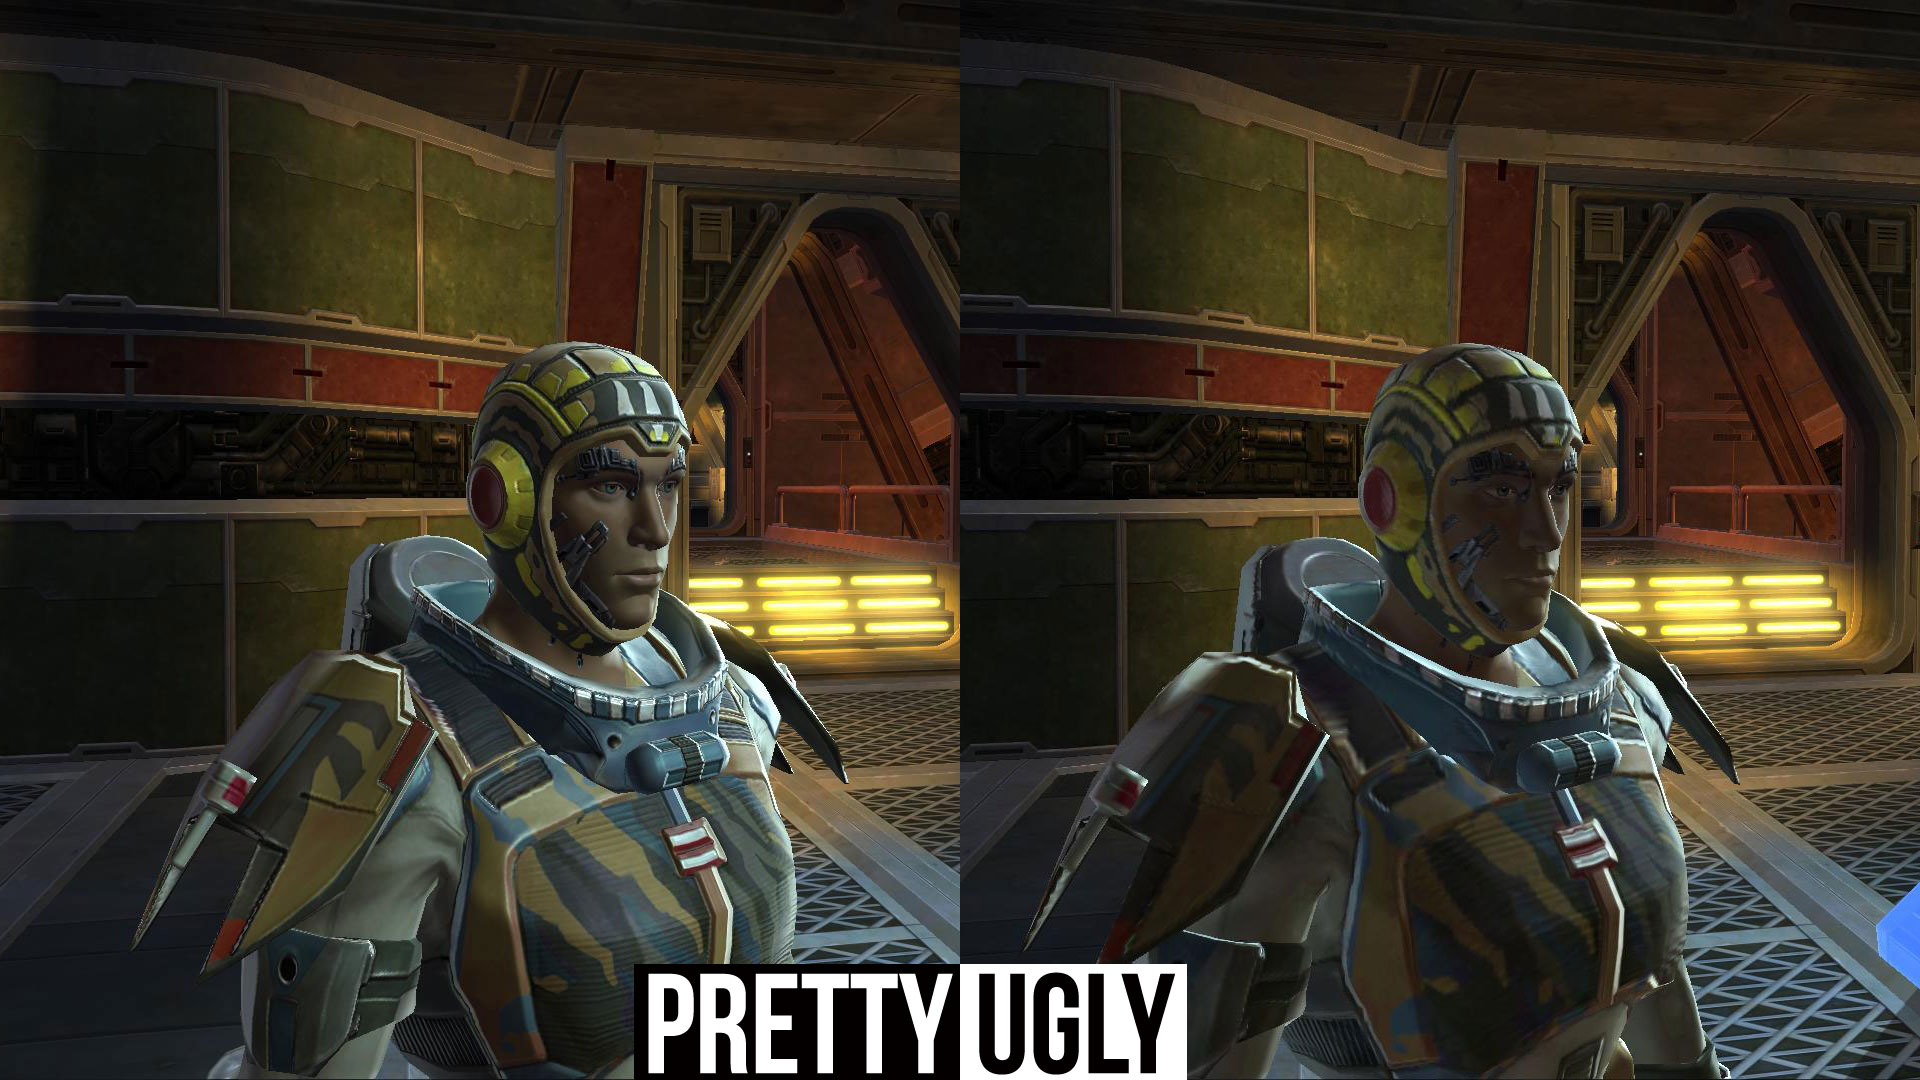 star wars knights of the old republic 2 graphics mod